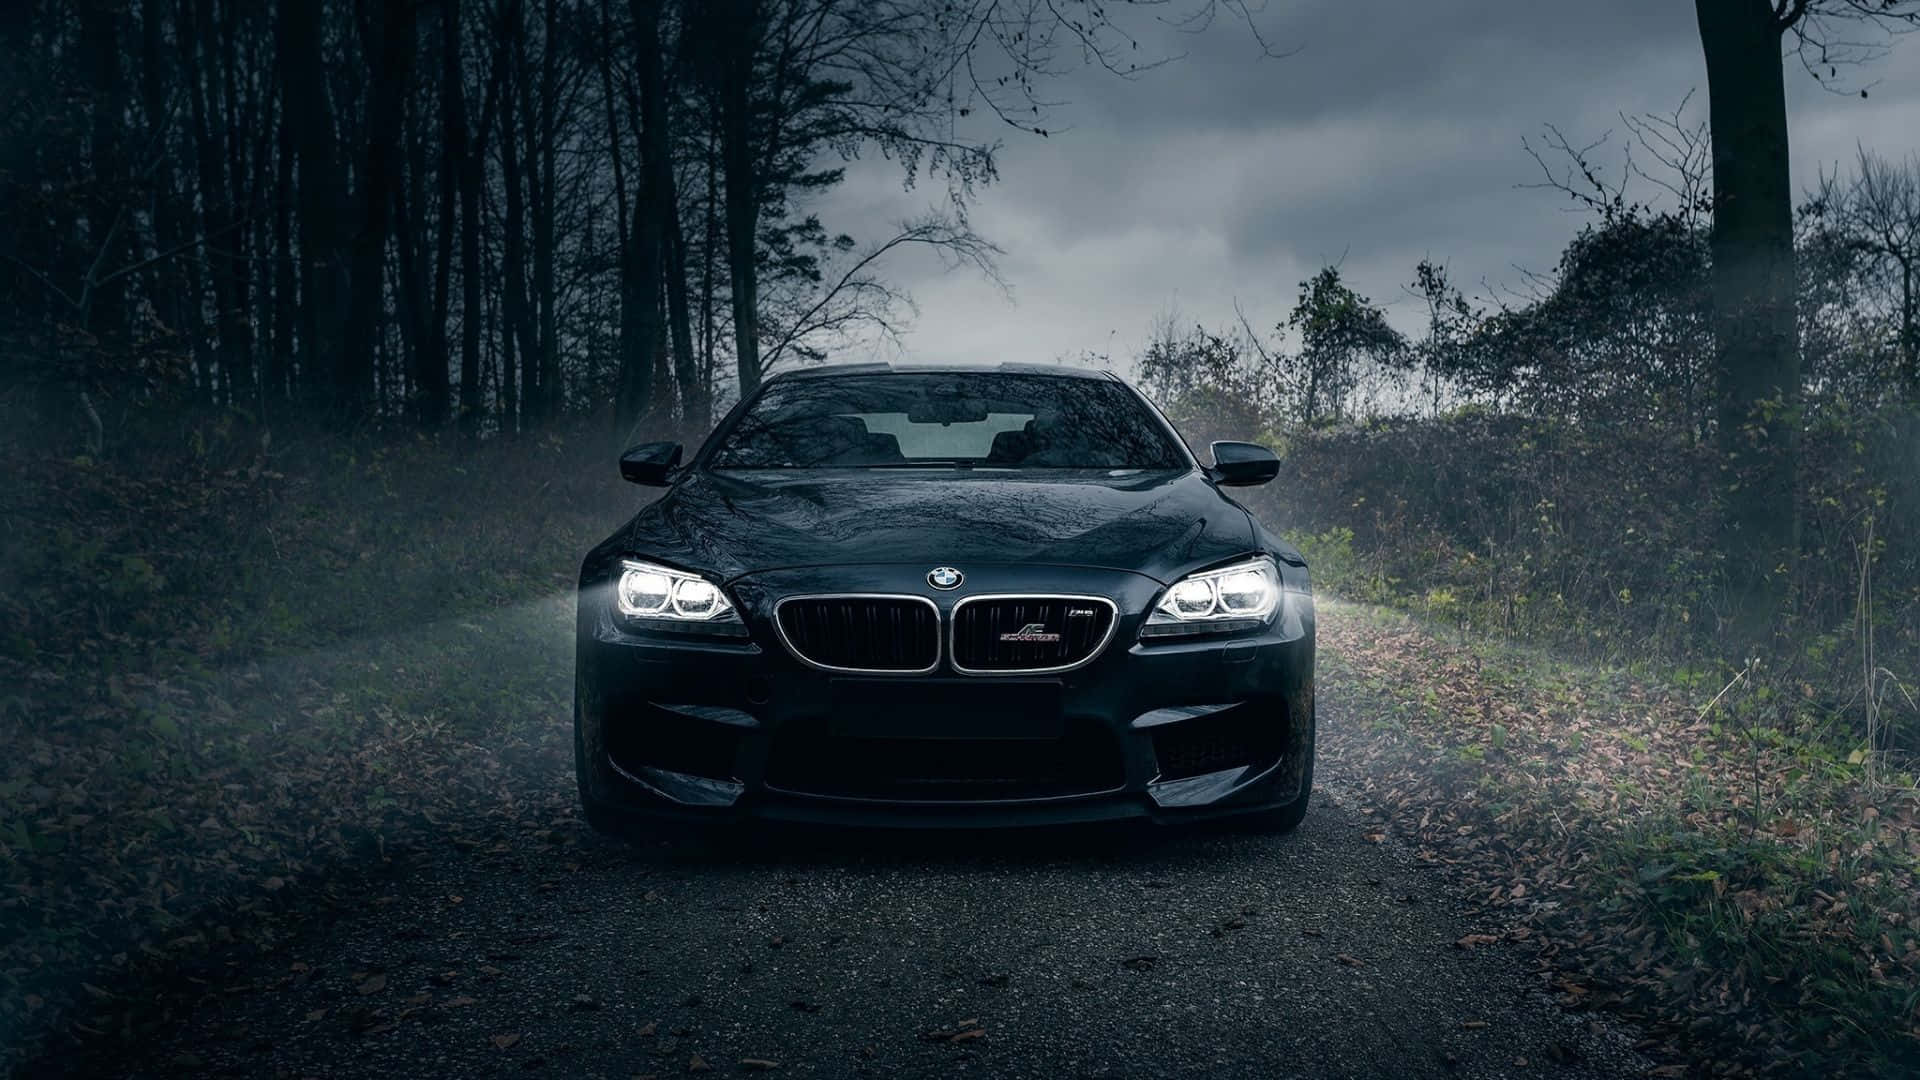 Cool BMW In Forest Wallpaper